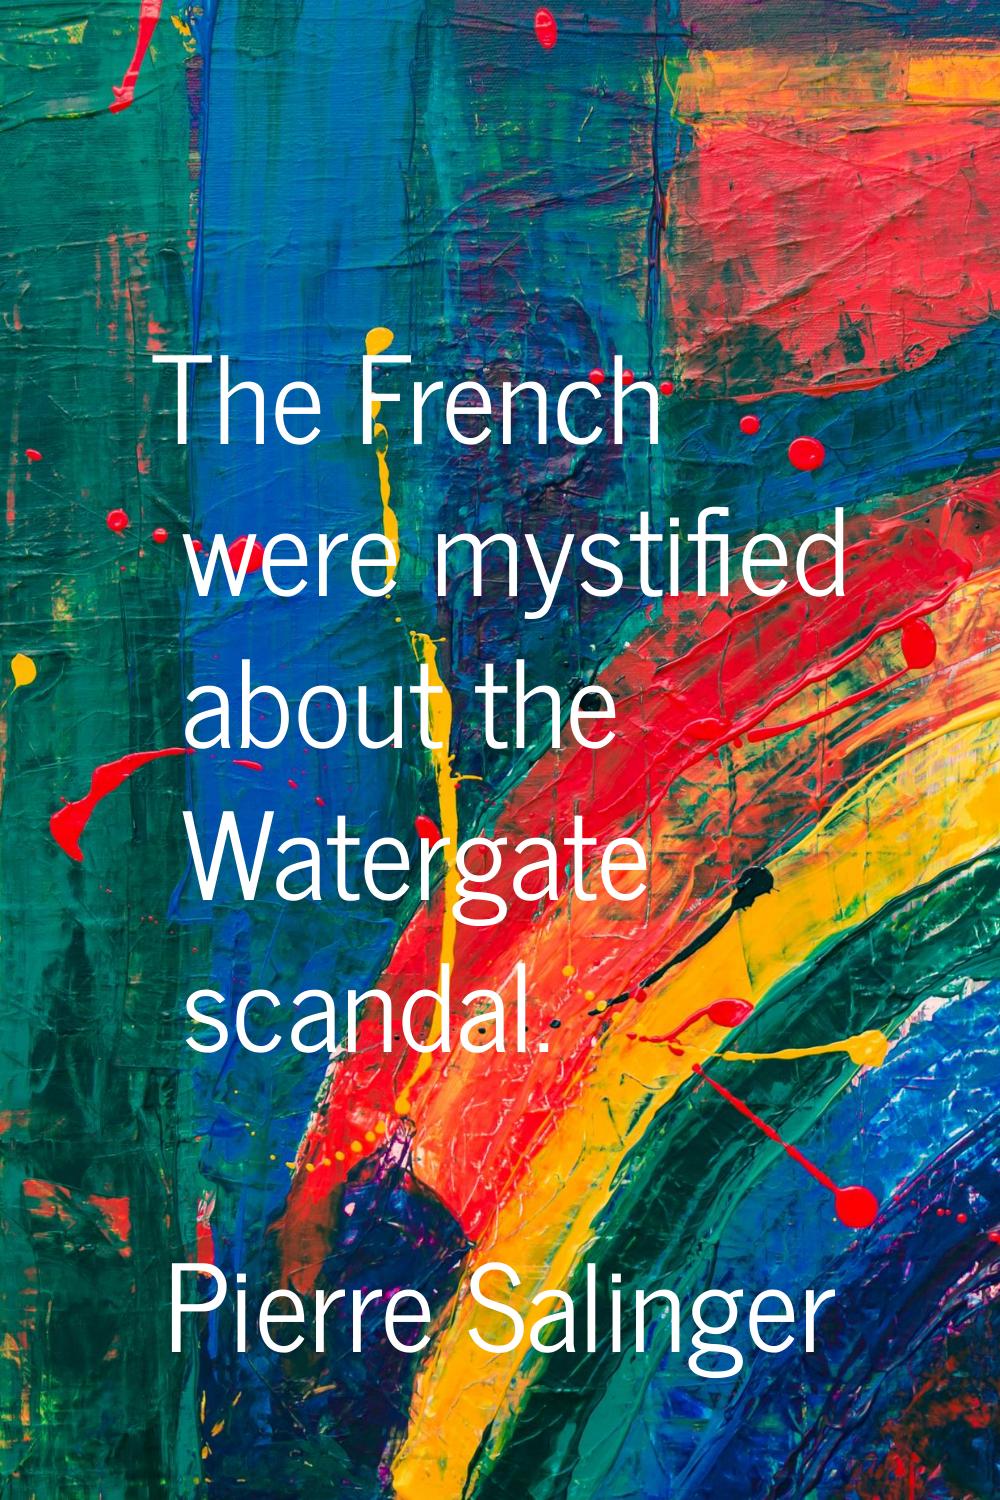 The French were mystified about the Watergate scandal.